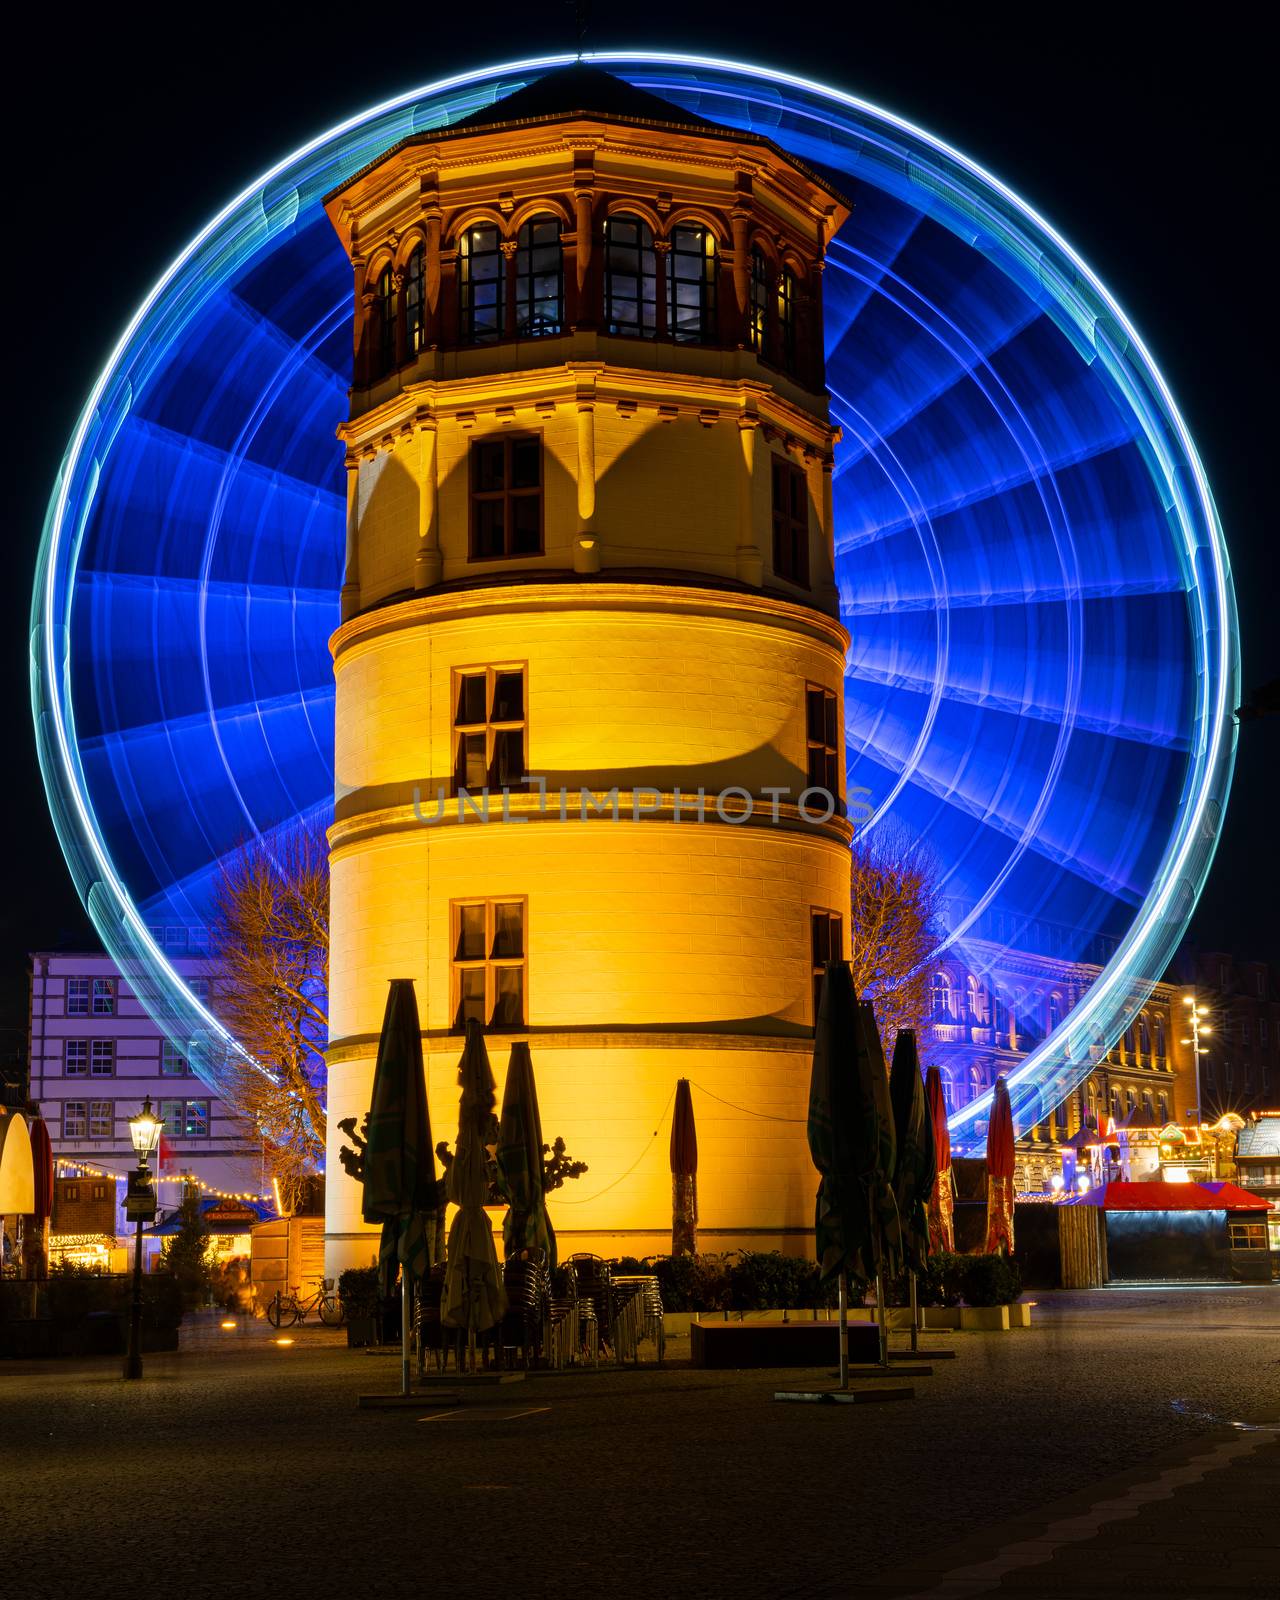 In motion, illuminated giant wheel  by alfotokunst